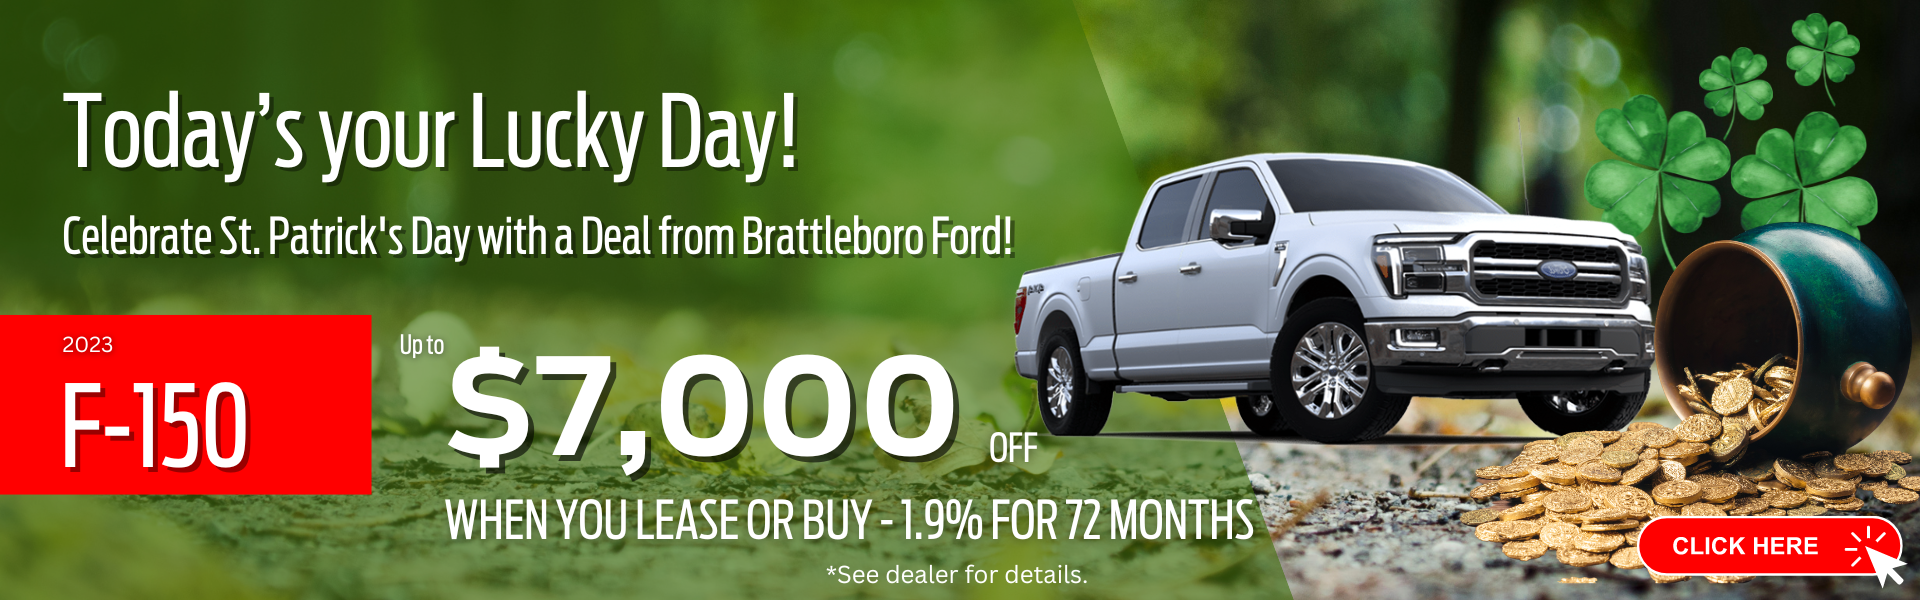 Lucky Day Event - Brattleboro Ford